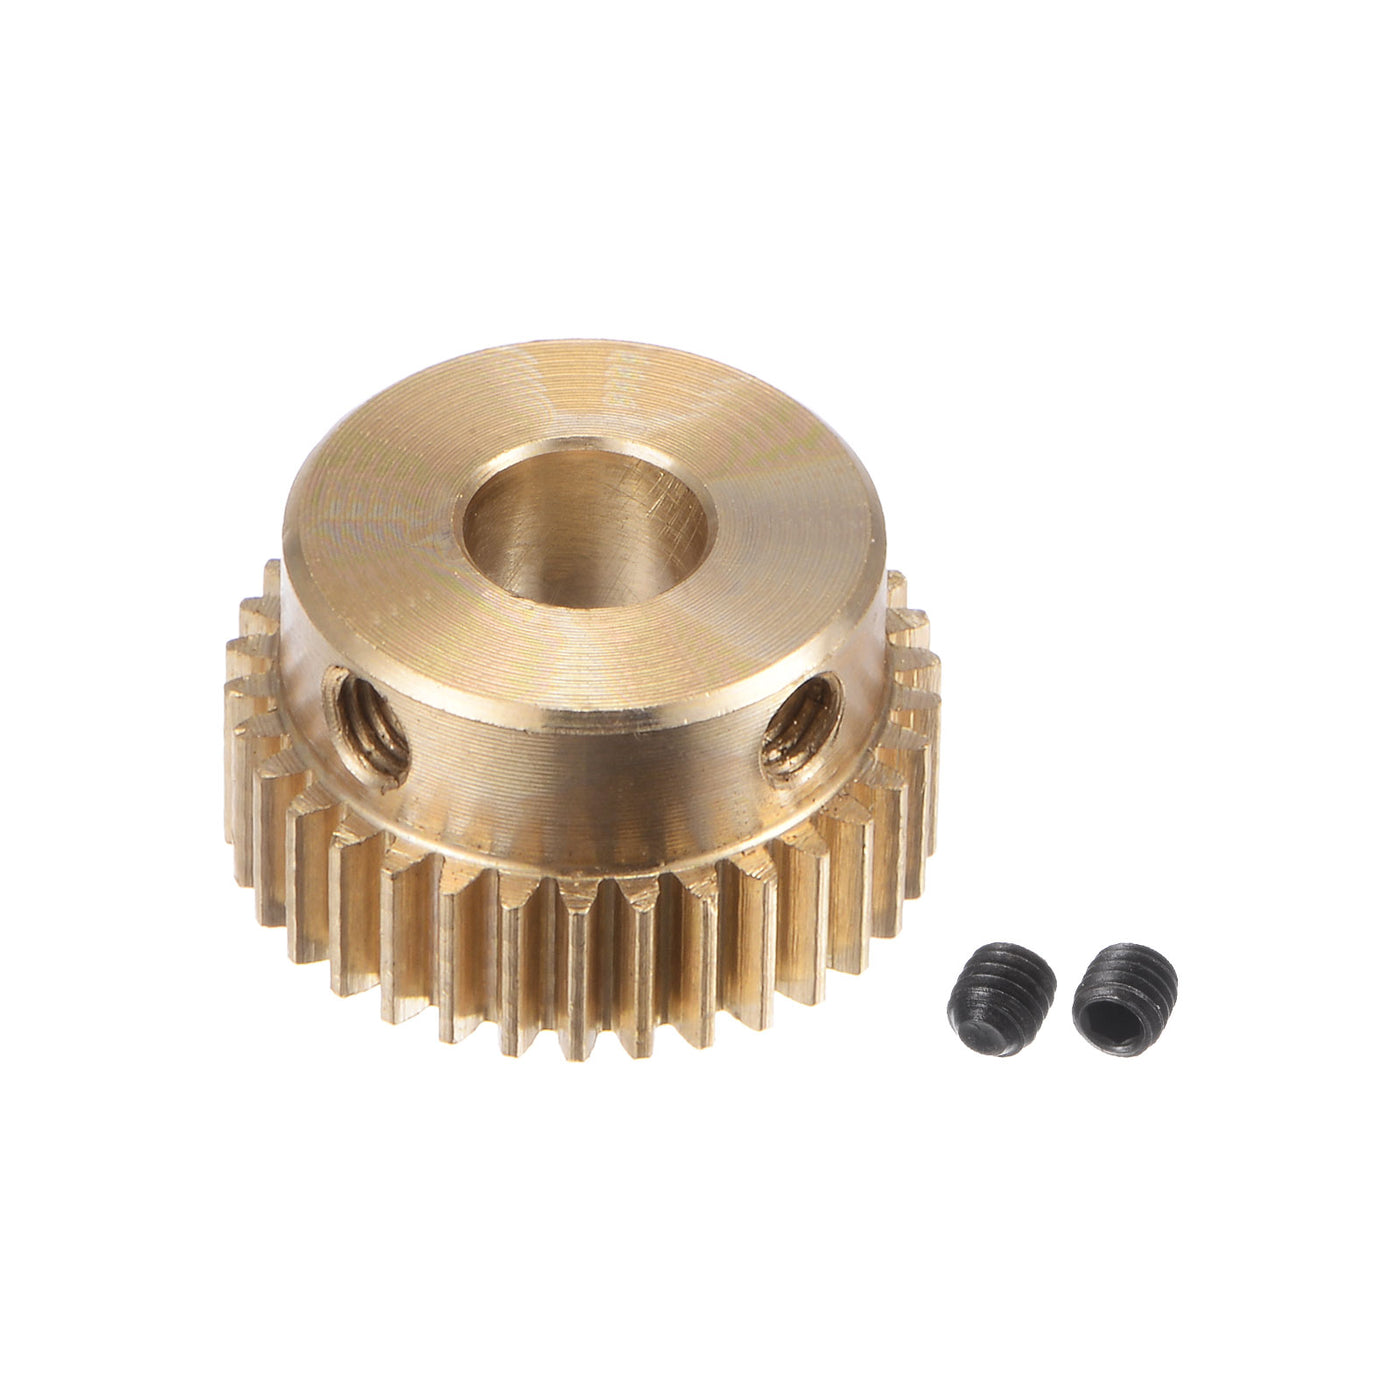 uxcell Uxcell 0.5 Mod 34T 6mm Bore 18mm Outer Dia Brass Motor Rack Pinion Gear with Screws